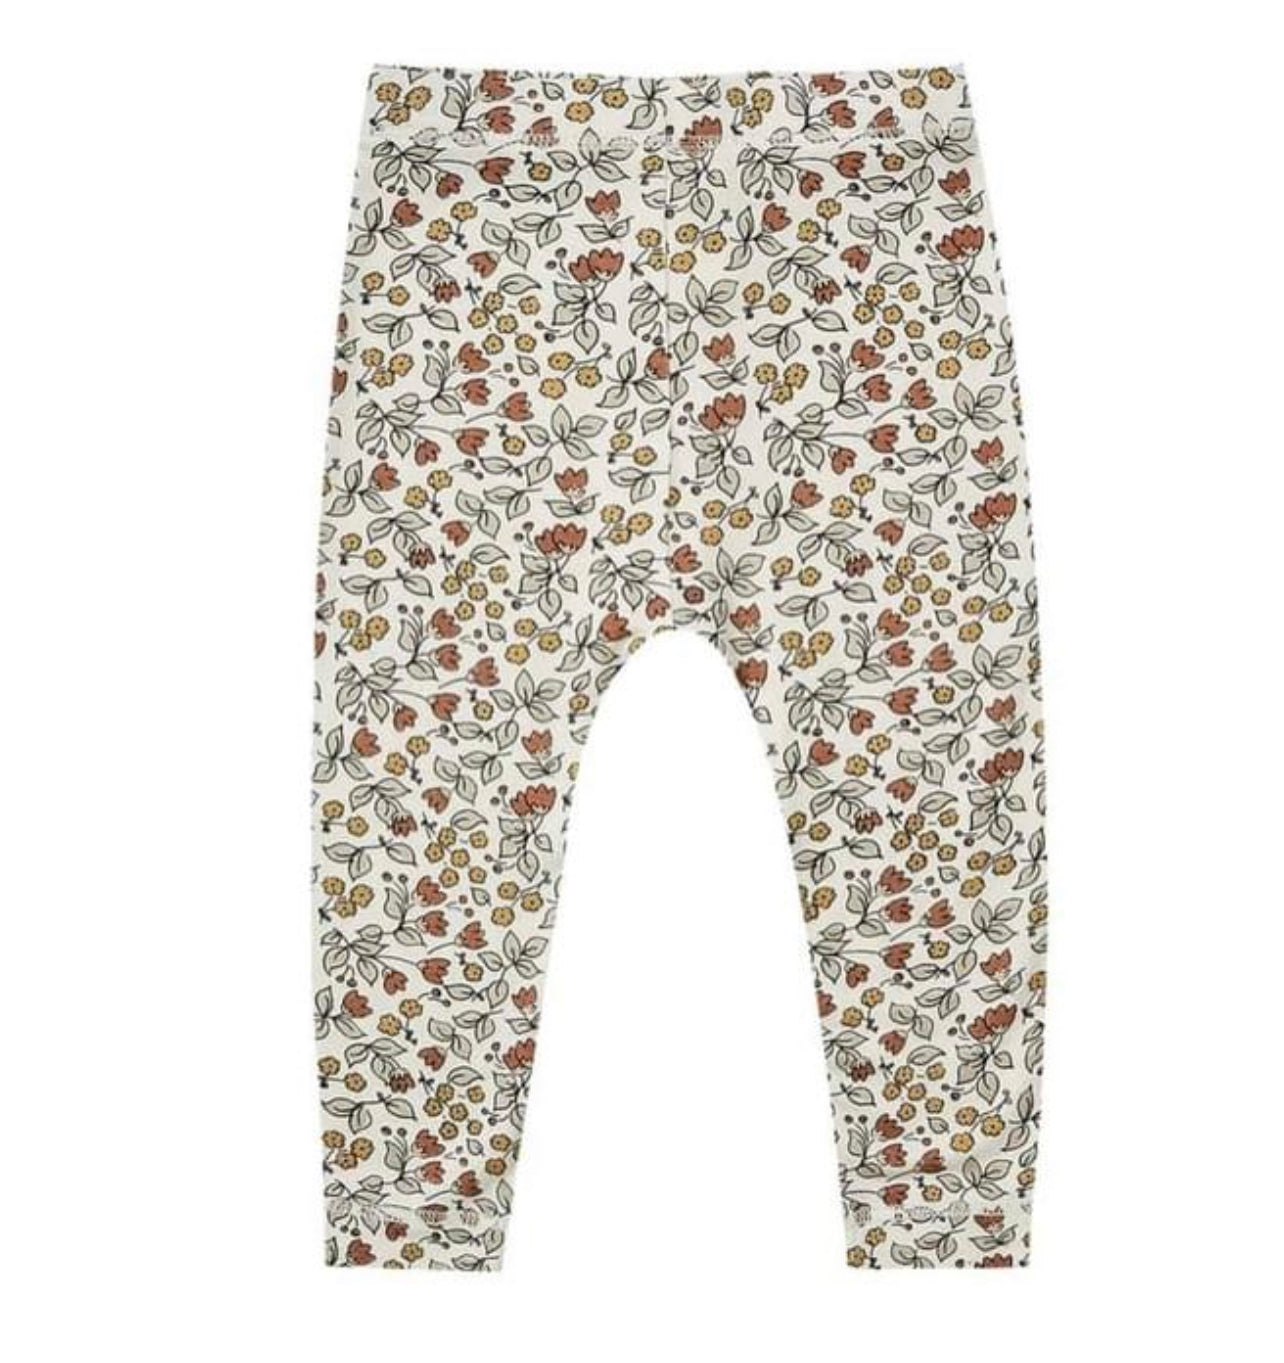 Bamboo Floral Leggings - Quincy Mae